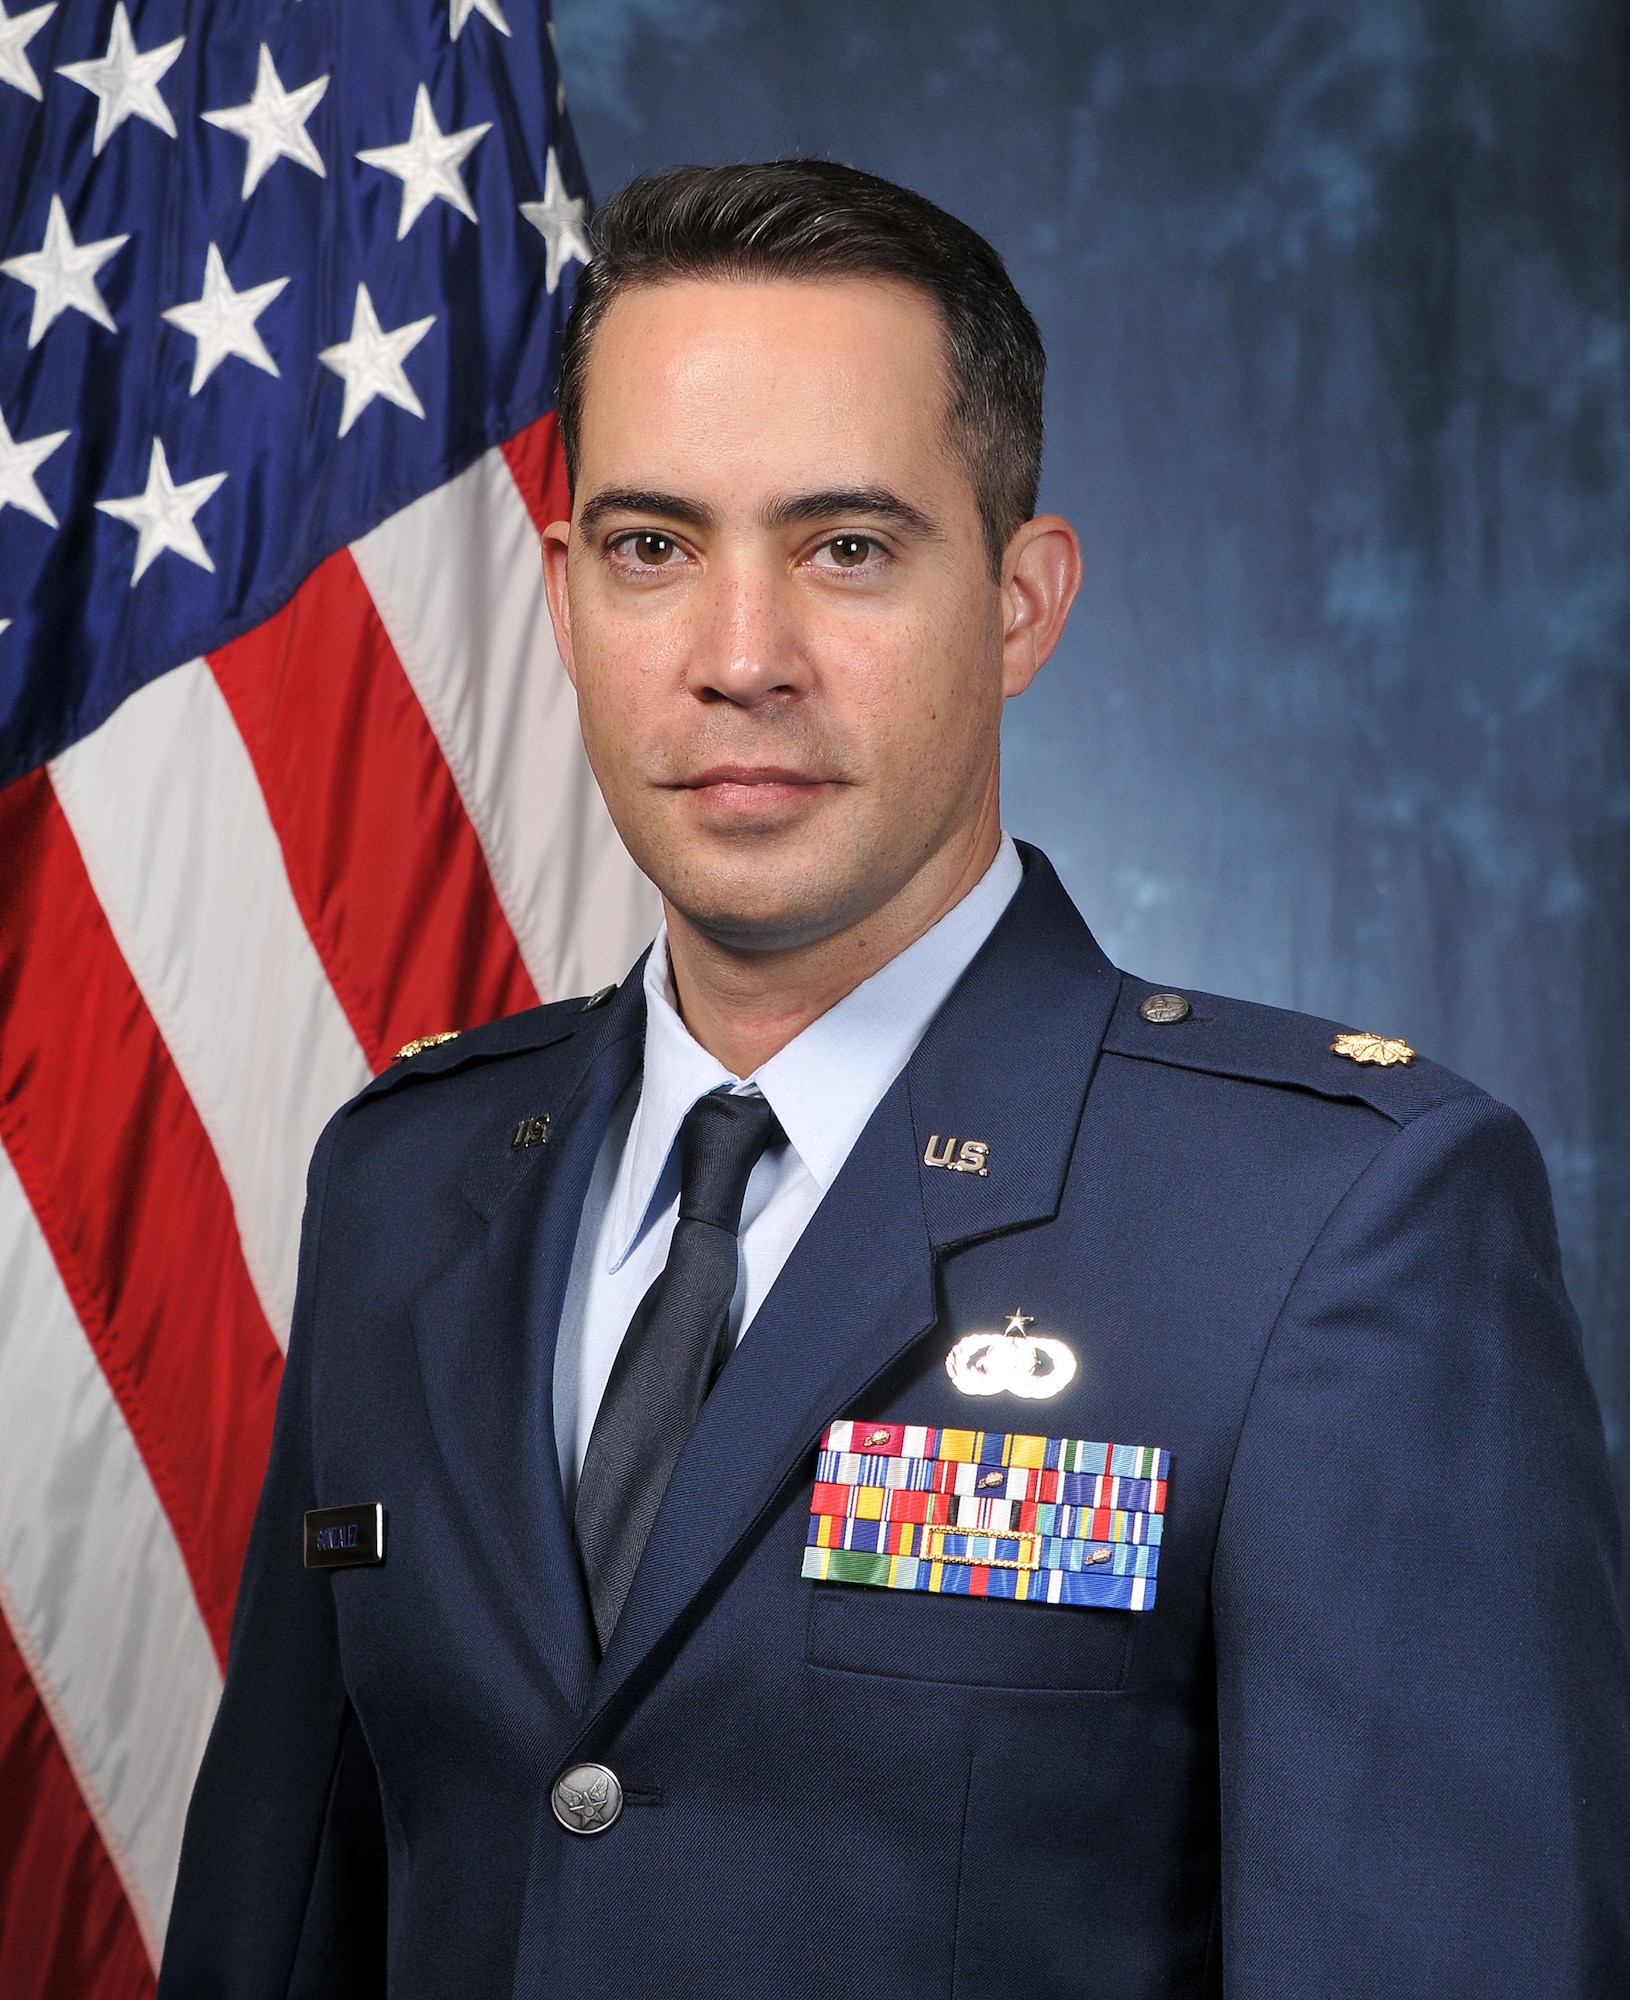 “LEAP has enriched my military career greatly. I am very proud of the opportunities I’ve been given to contribute to the Air Force mission as well as to the defense and our country by using my language and cultural skills,” Spanish Language Enabled Airman Program Scholar Maj. Andrews Gonzalez said.